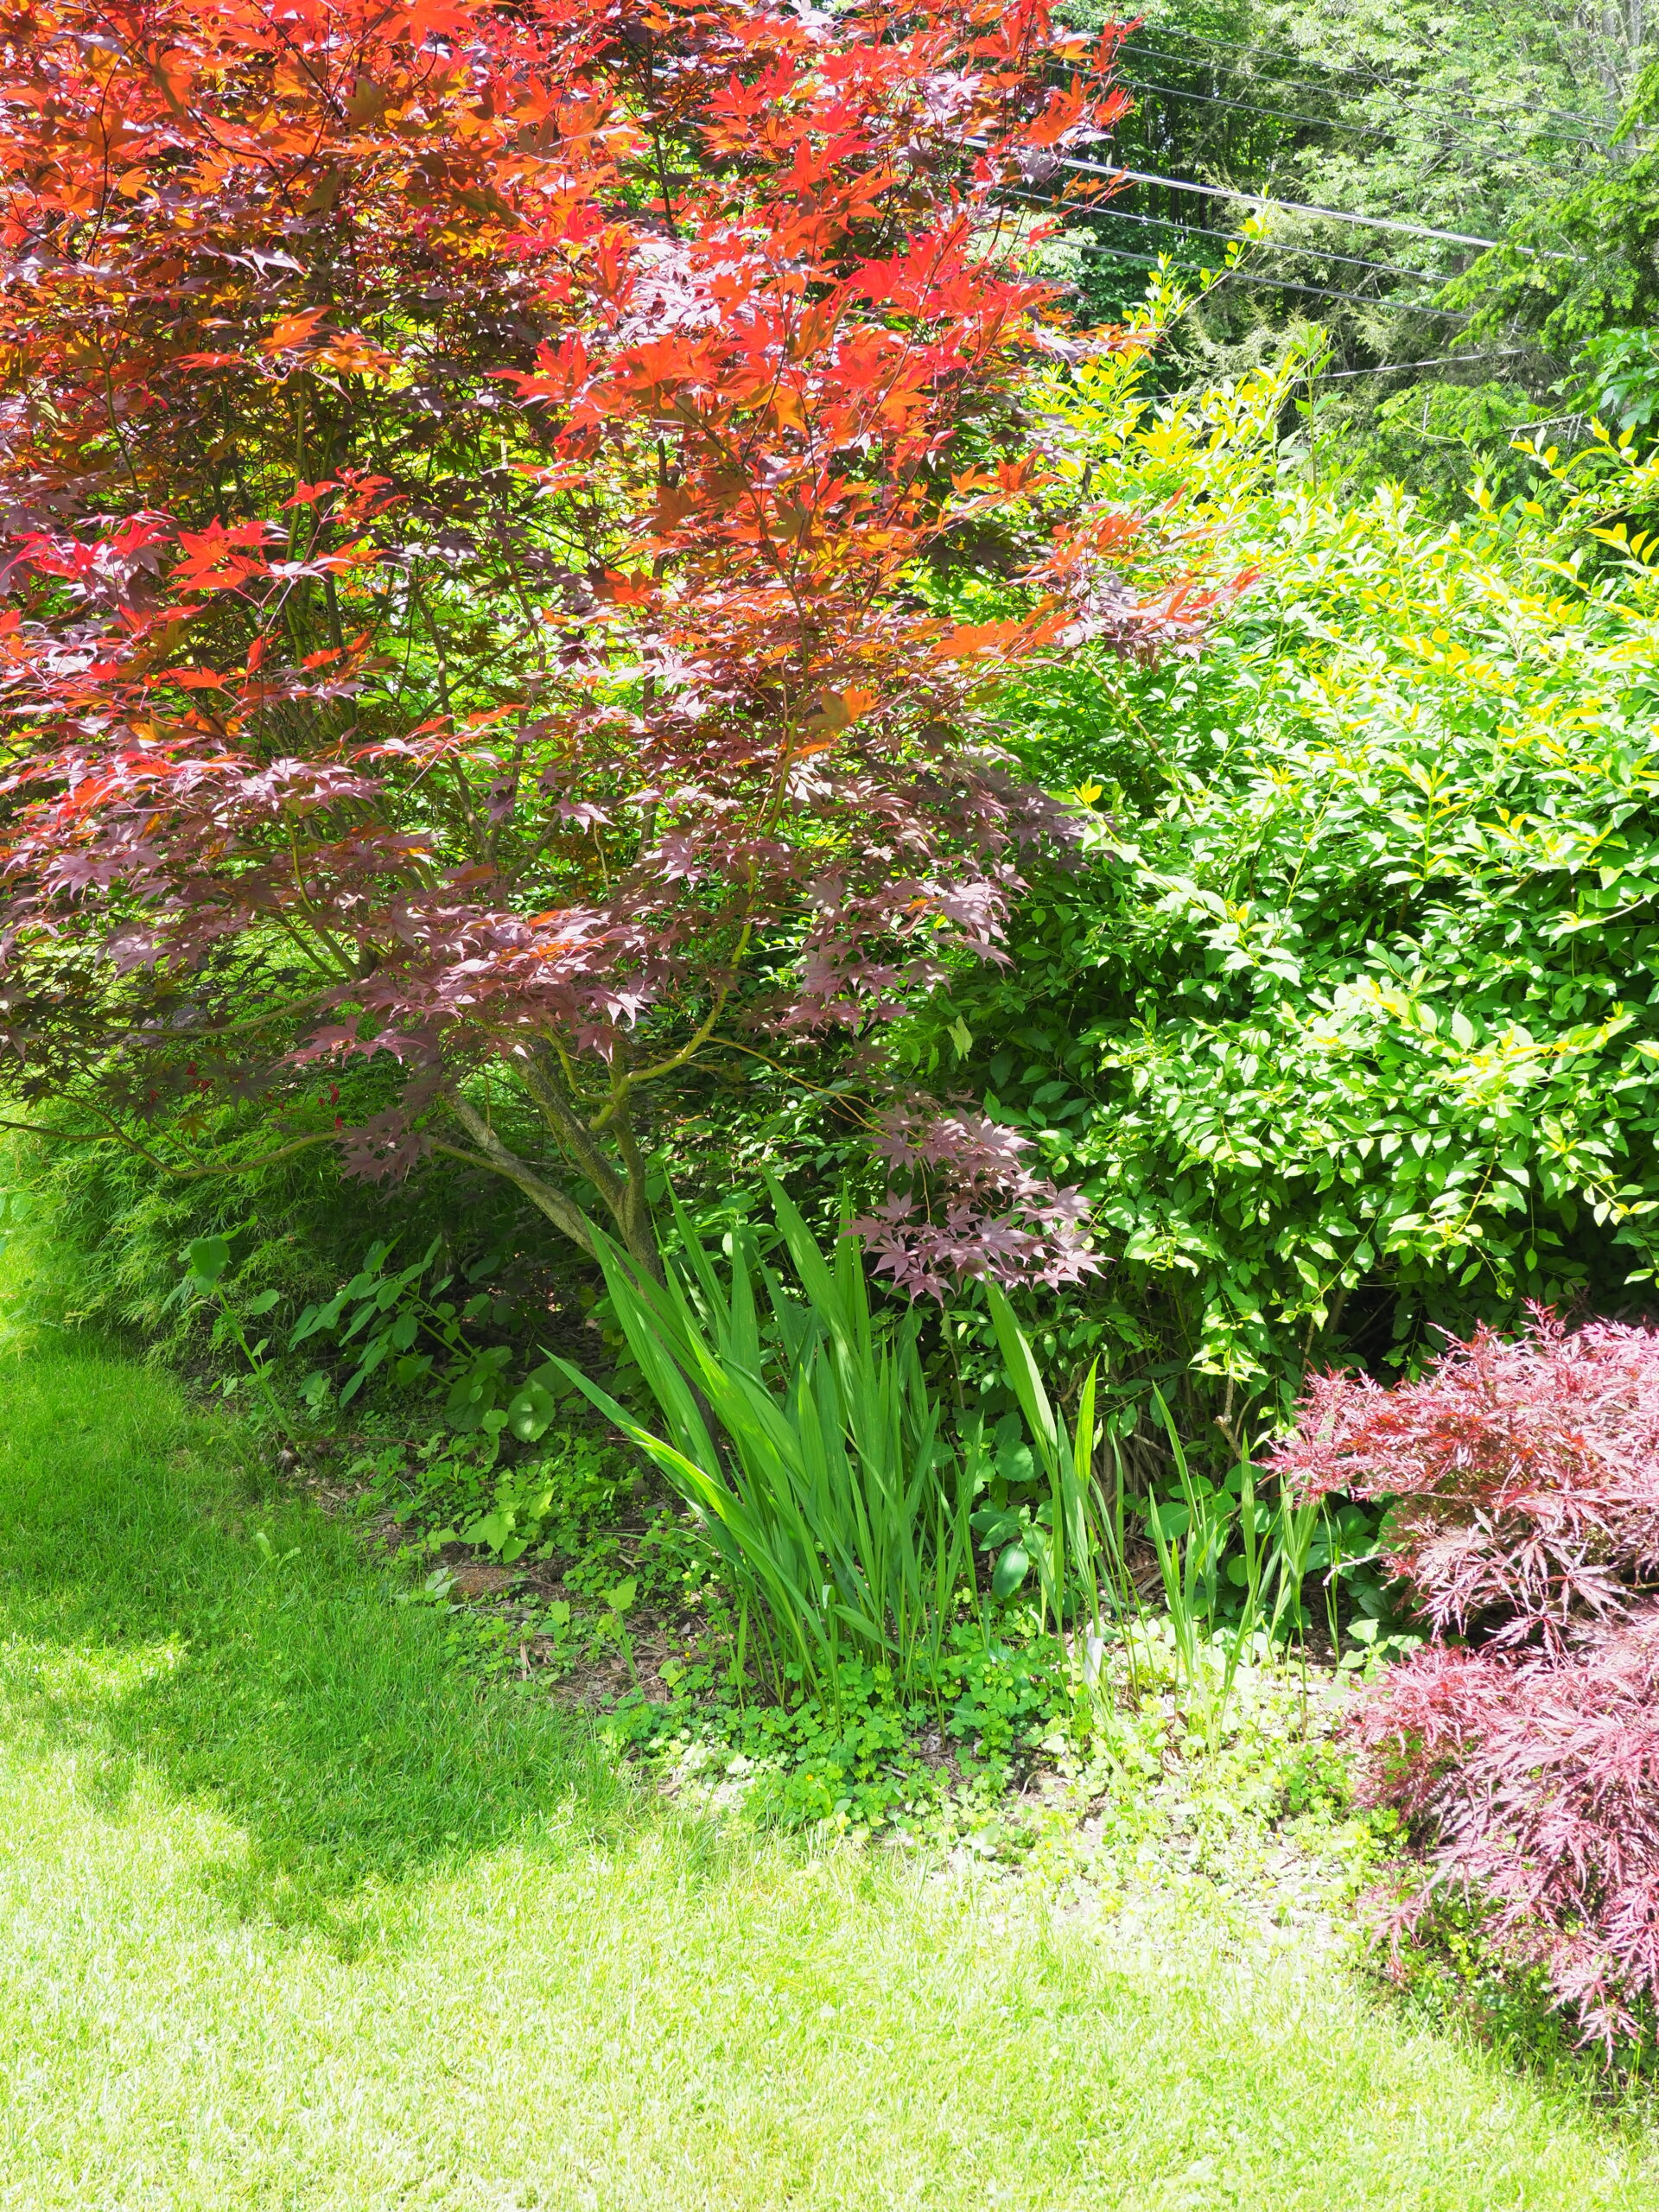 The Japanese maple to the left was only 2 feet tall when the Crocosmia bulbs were planted to the right of it. Now the maple shades the Crocosmia most of the day, causing the leaves, then the long arching flower stalks, to lean far forward toward the sun causing the stems to weaken and fall. Late in the summer when the plants go dormant they can be lifted, the bulbs harvested and moved to a sunnier location.